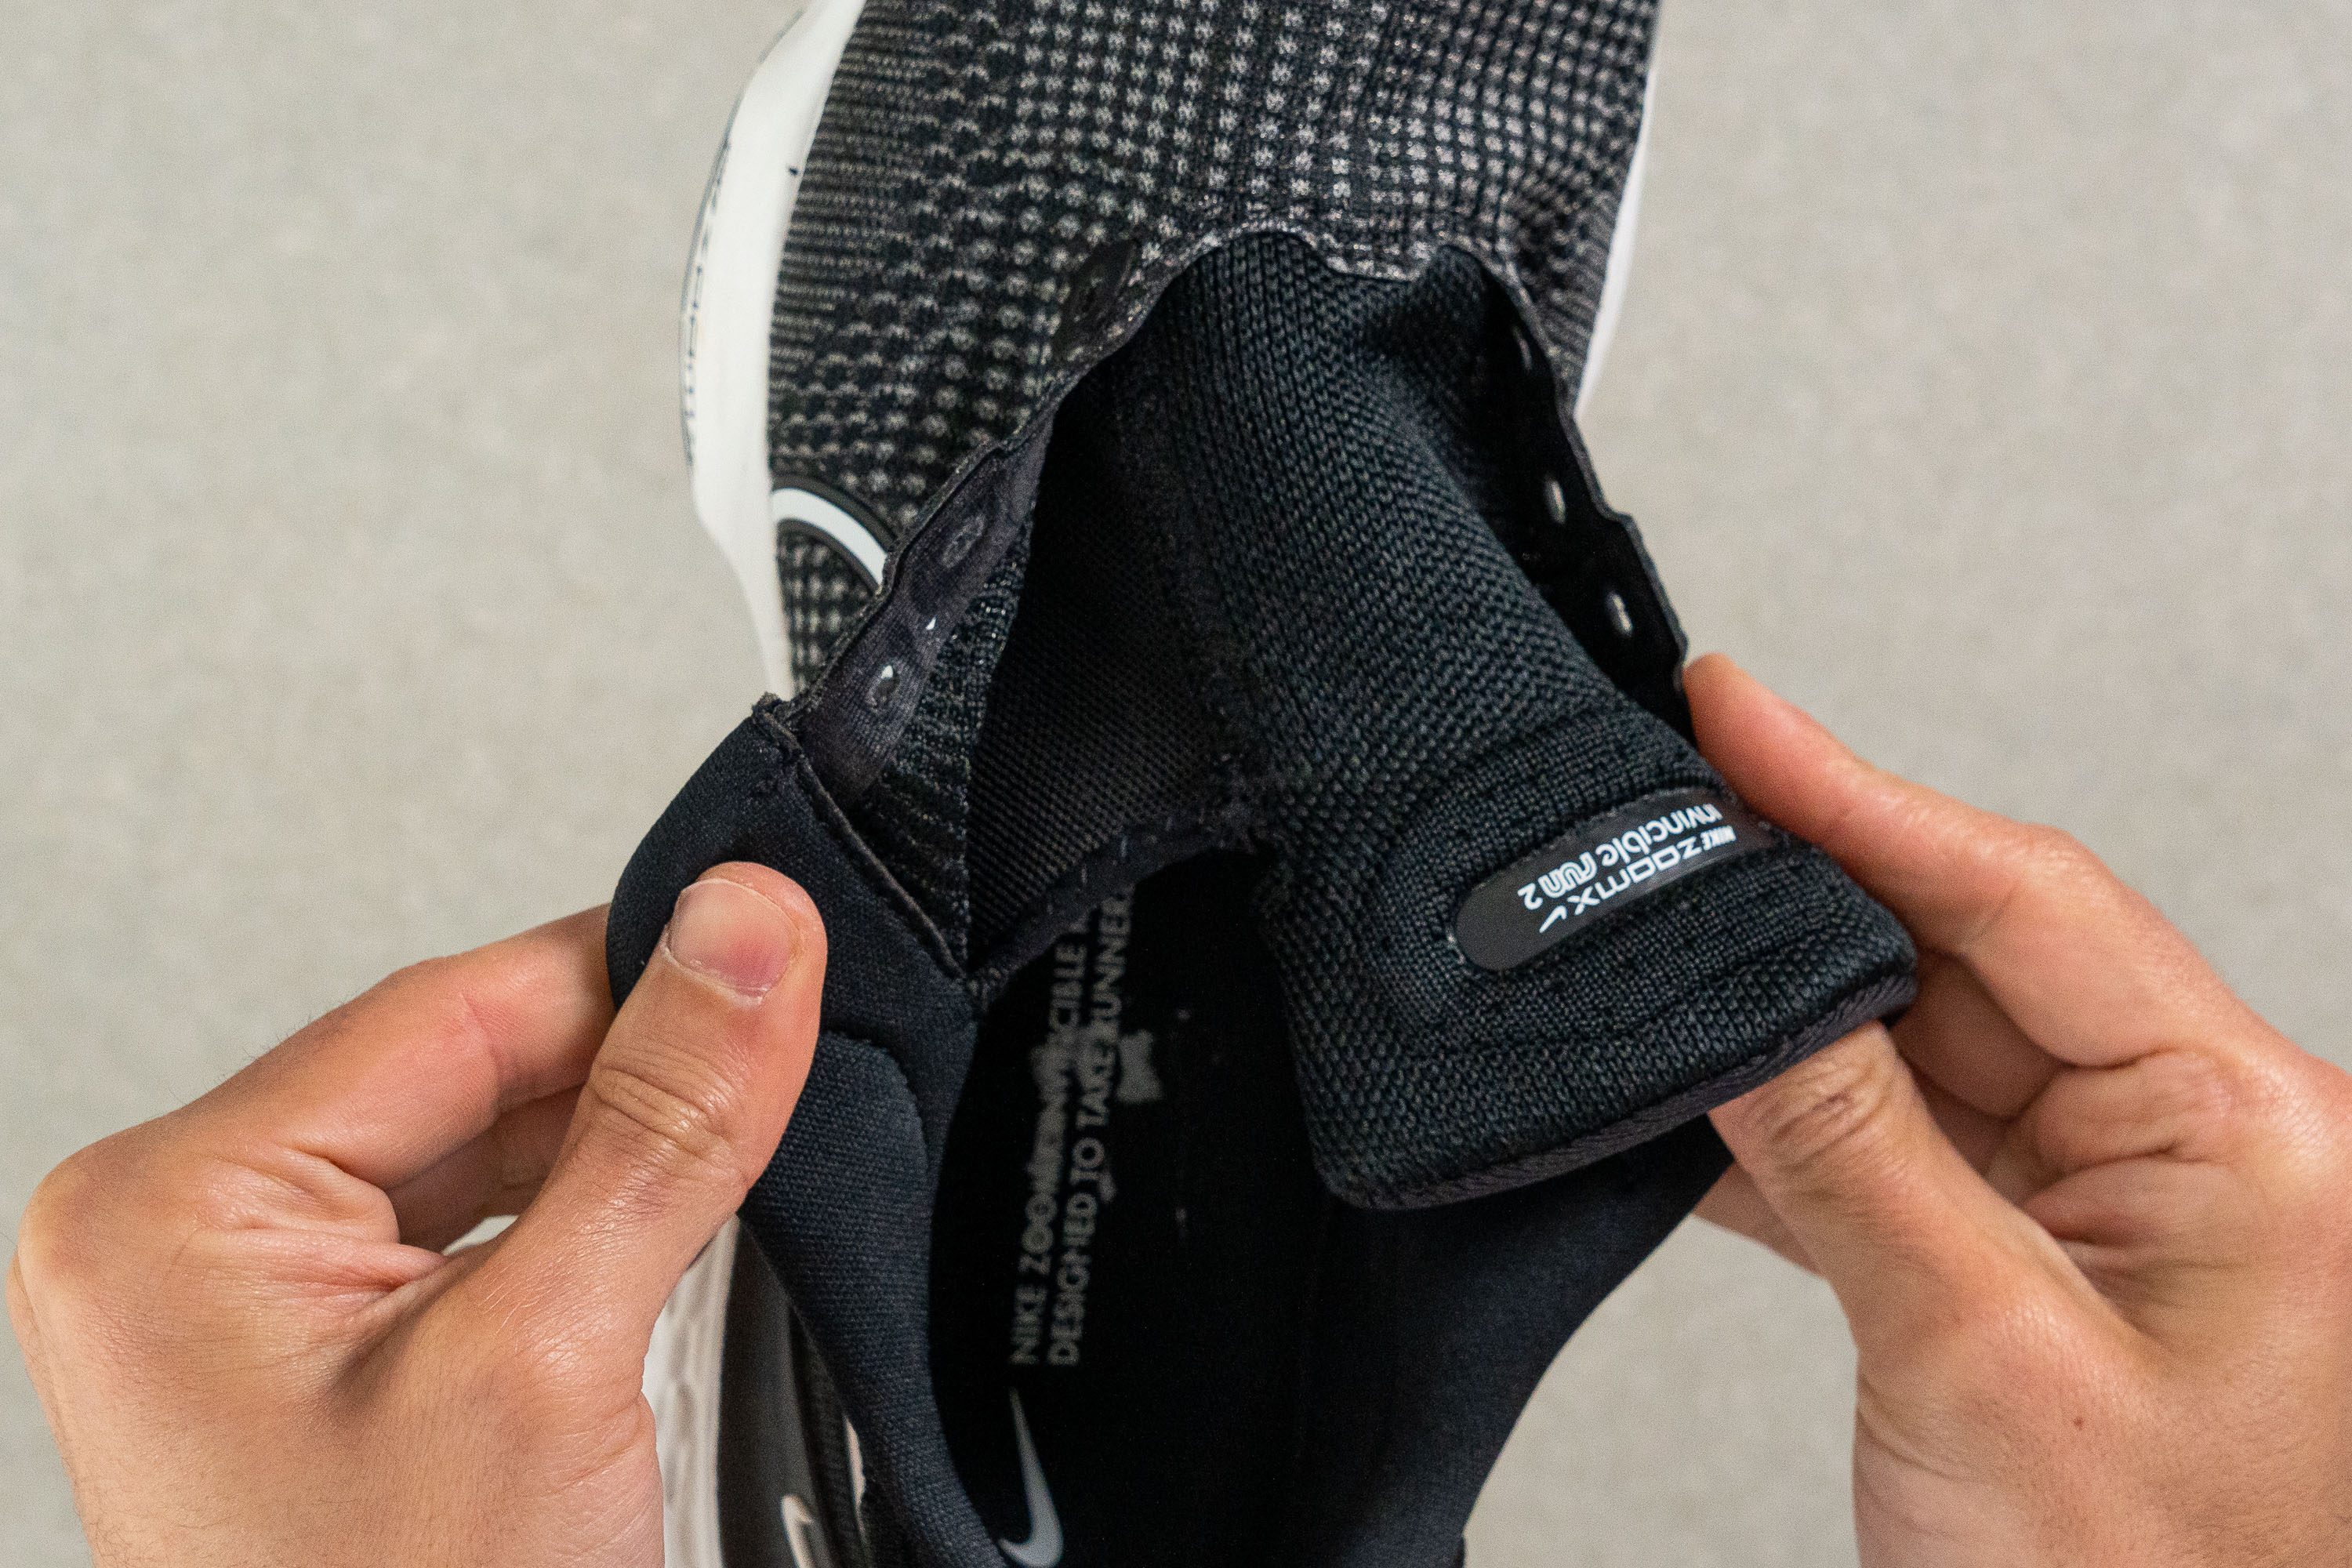 Nike Invincible 3 Review 2023: Plush Everyday Trainers for Less-Achy Miles